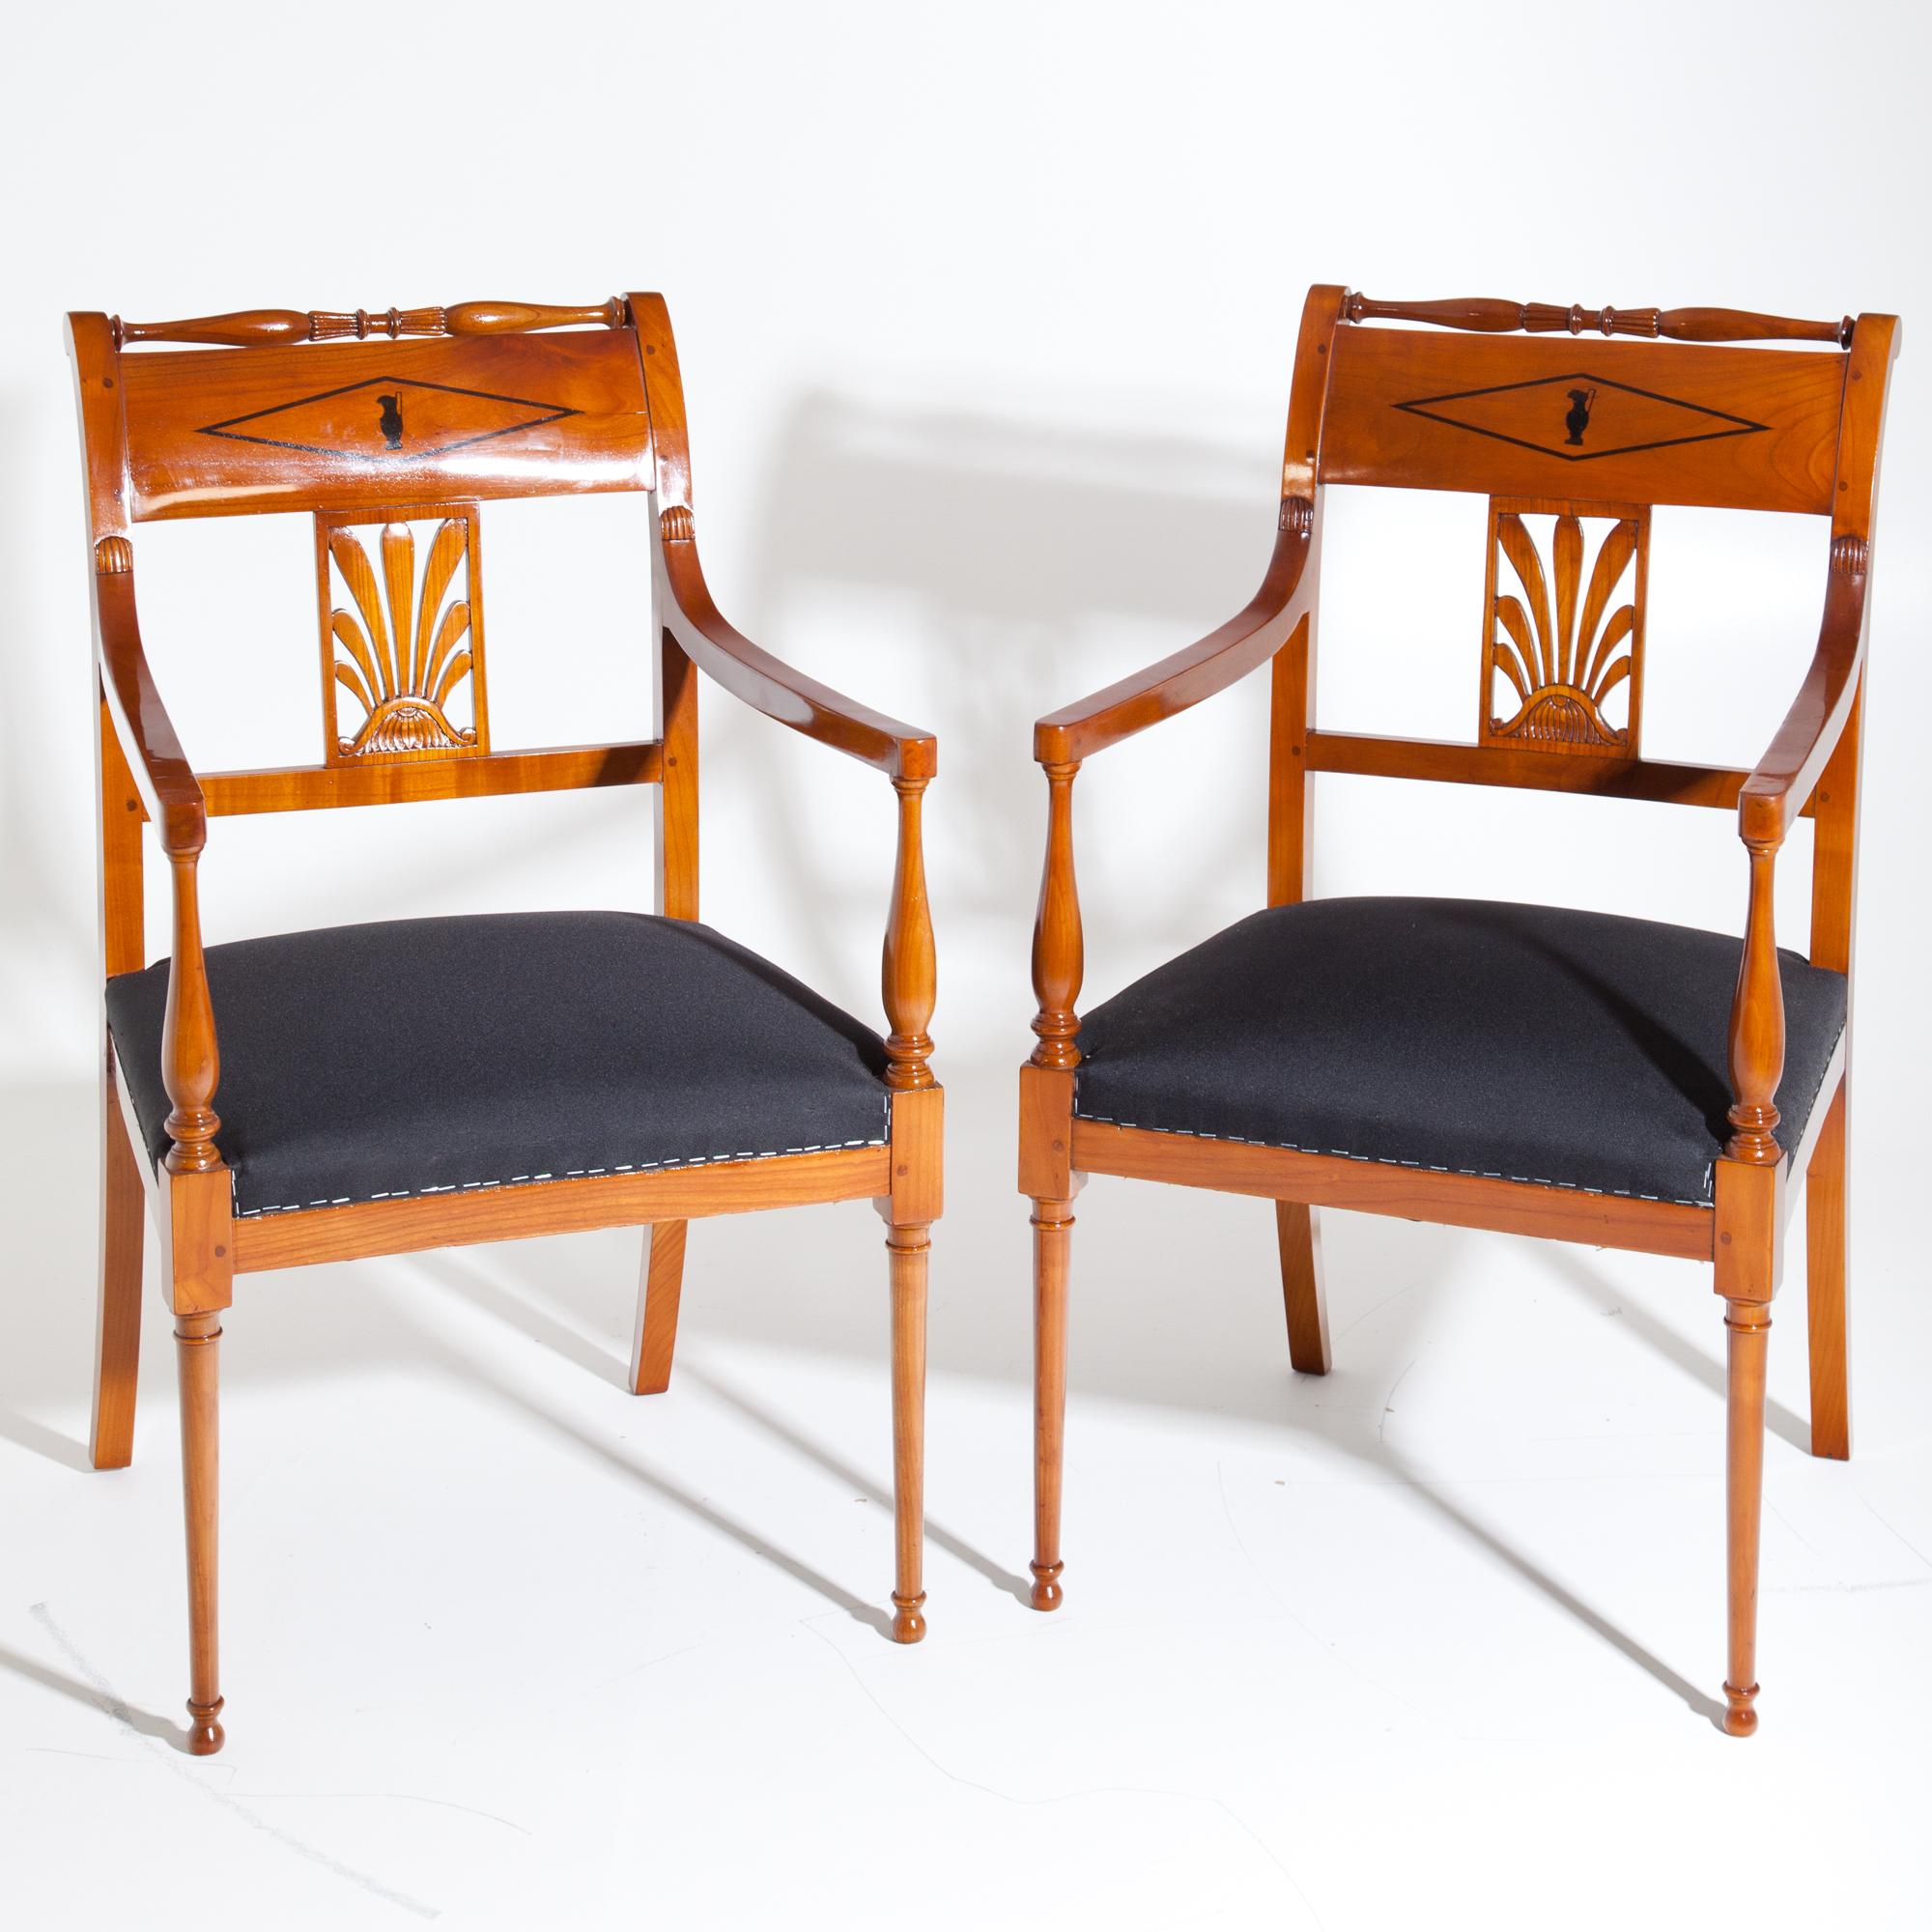 Pair of restoration armchairs made of solid cherry wood standing on conical legs in the front and slightly flared sabre legs in the back. The armrests rest on baluster-shaped supports, the backrests show further baluster-shaped elements as well as